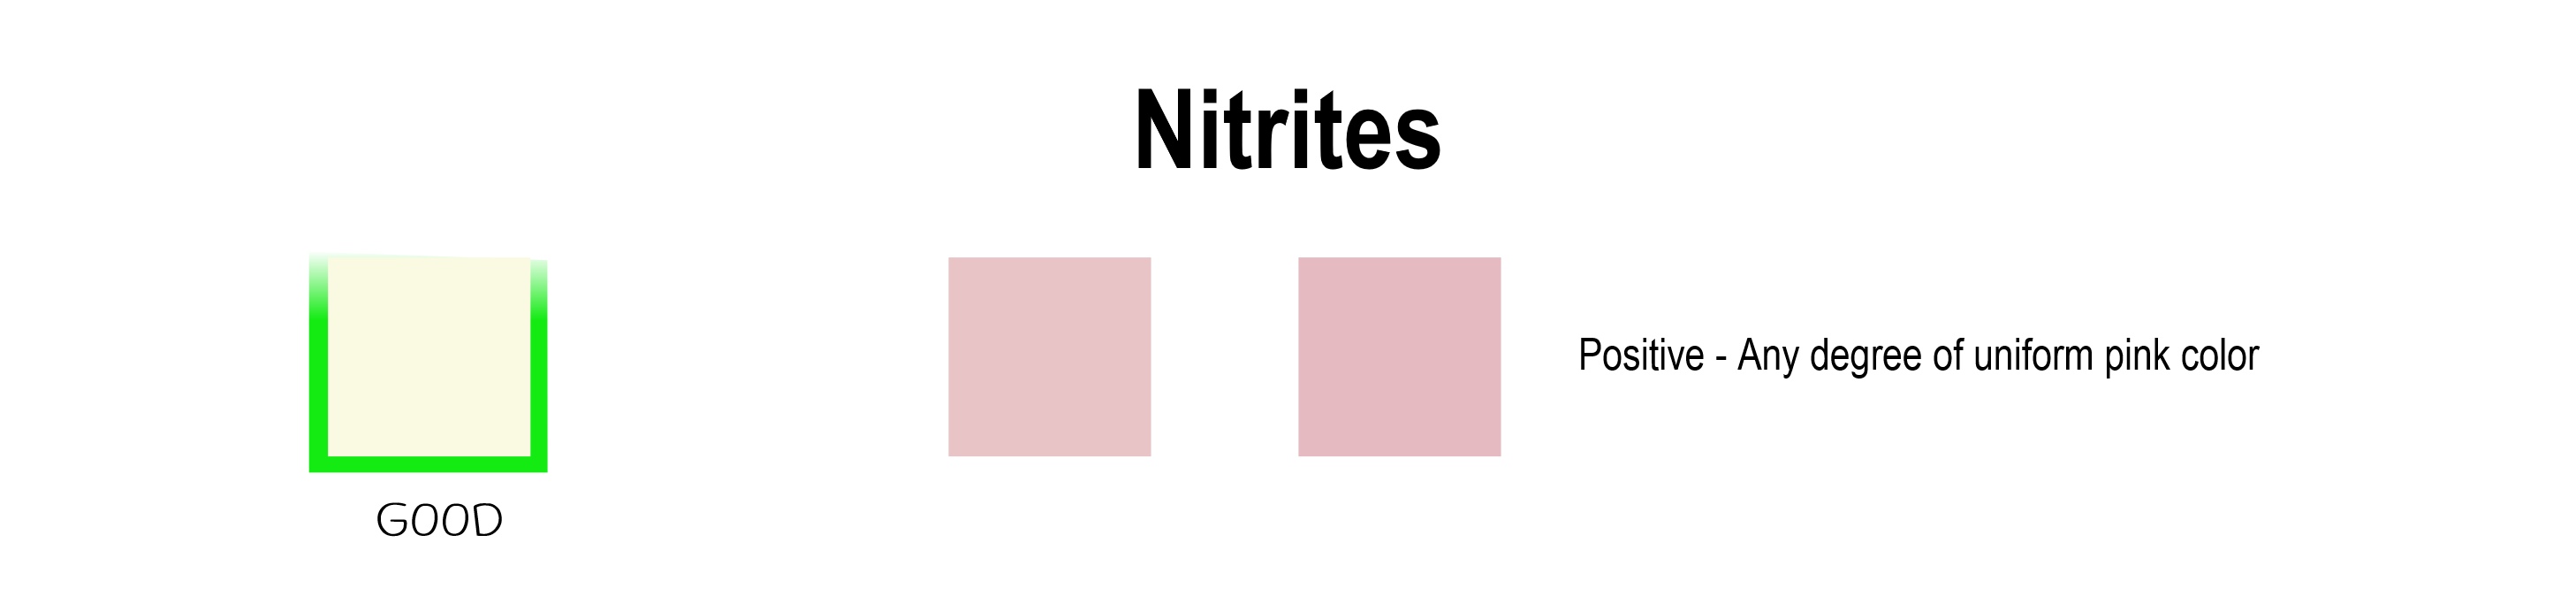 How to Read Urine Test Strips - Nitrites for blog mtm